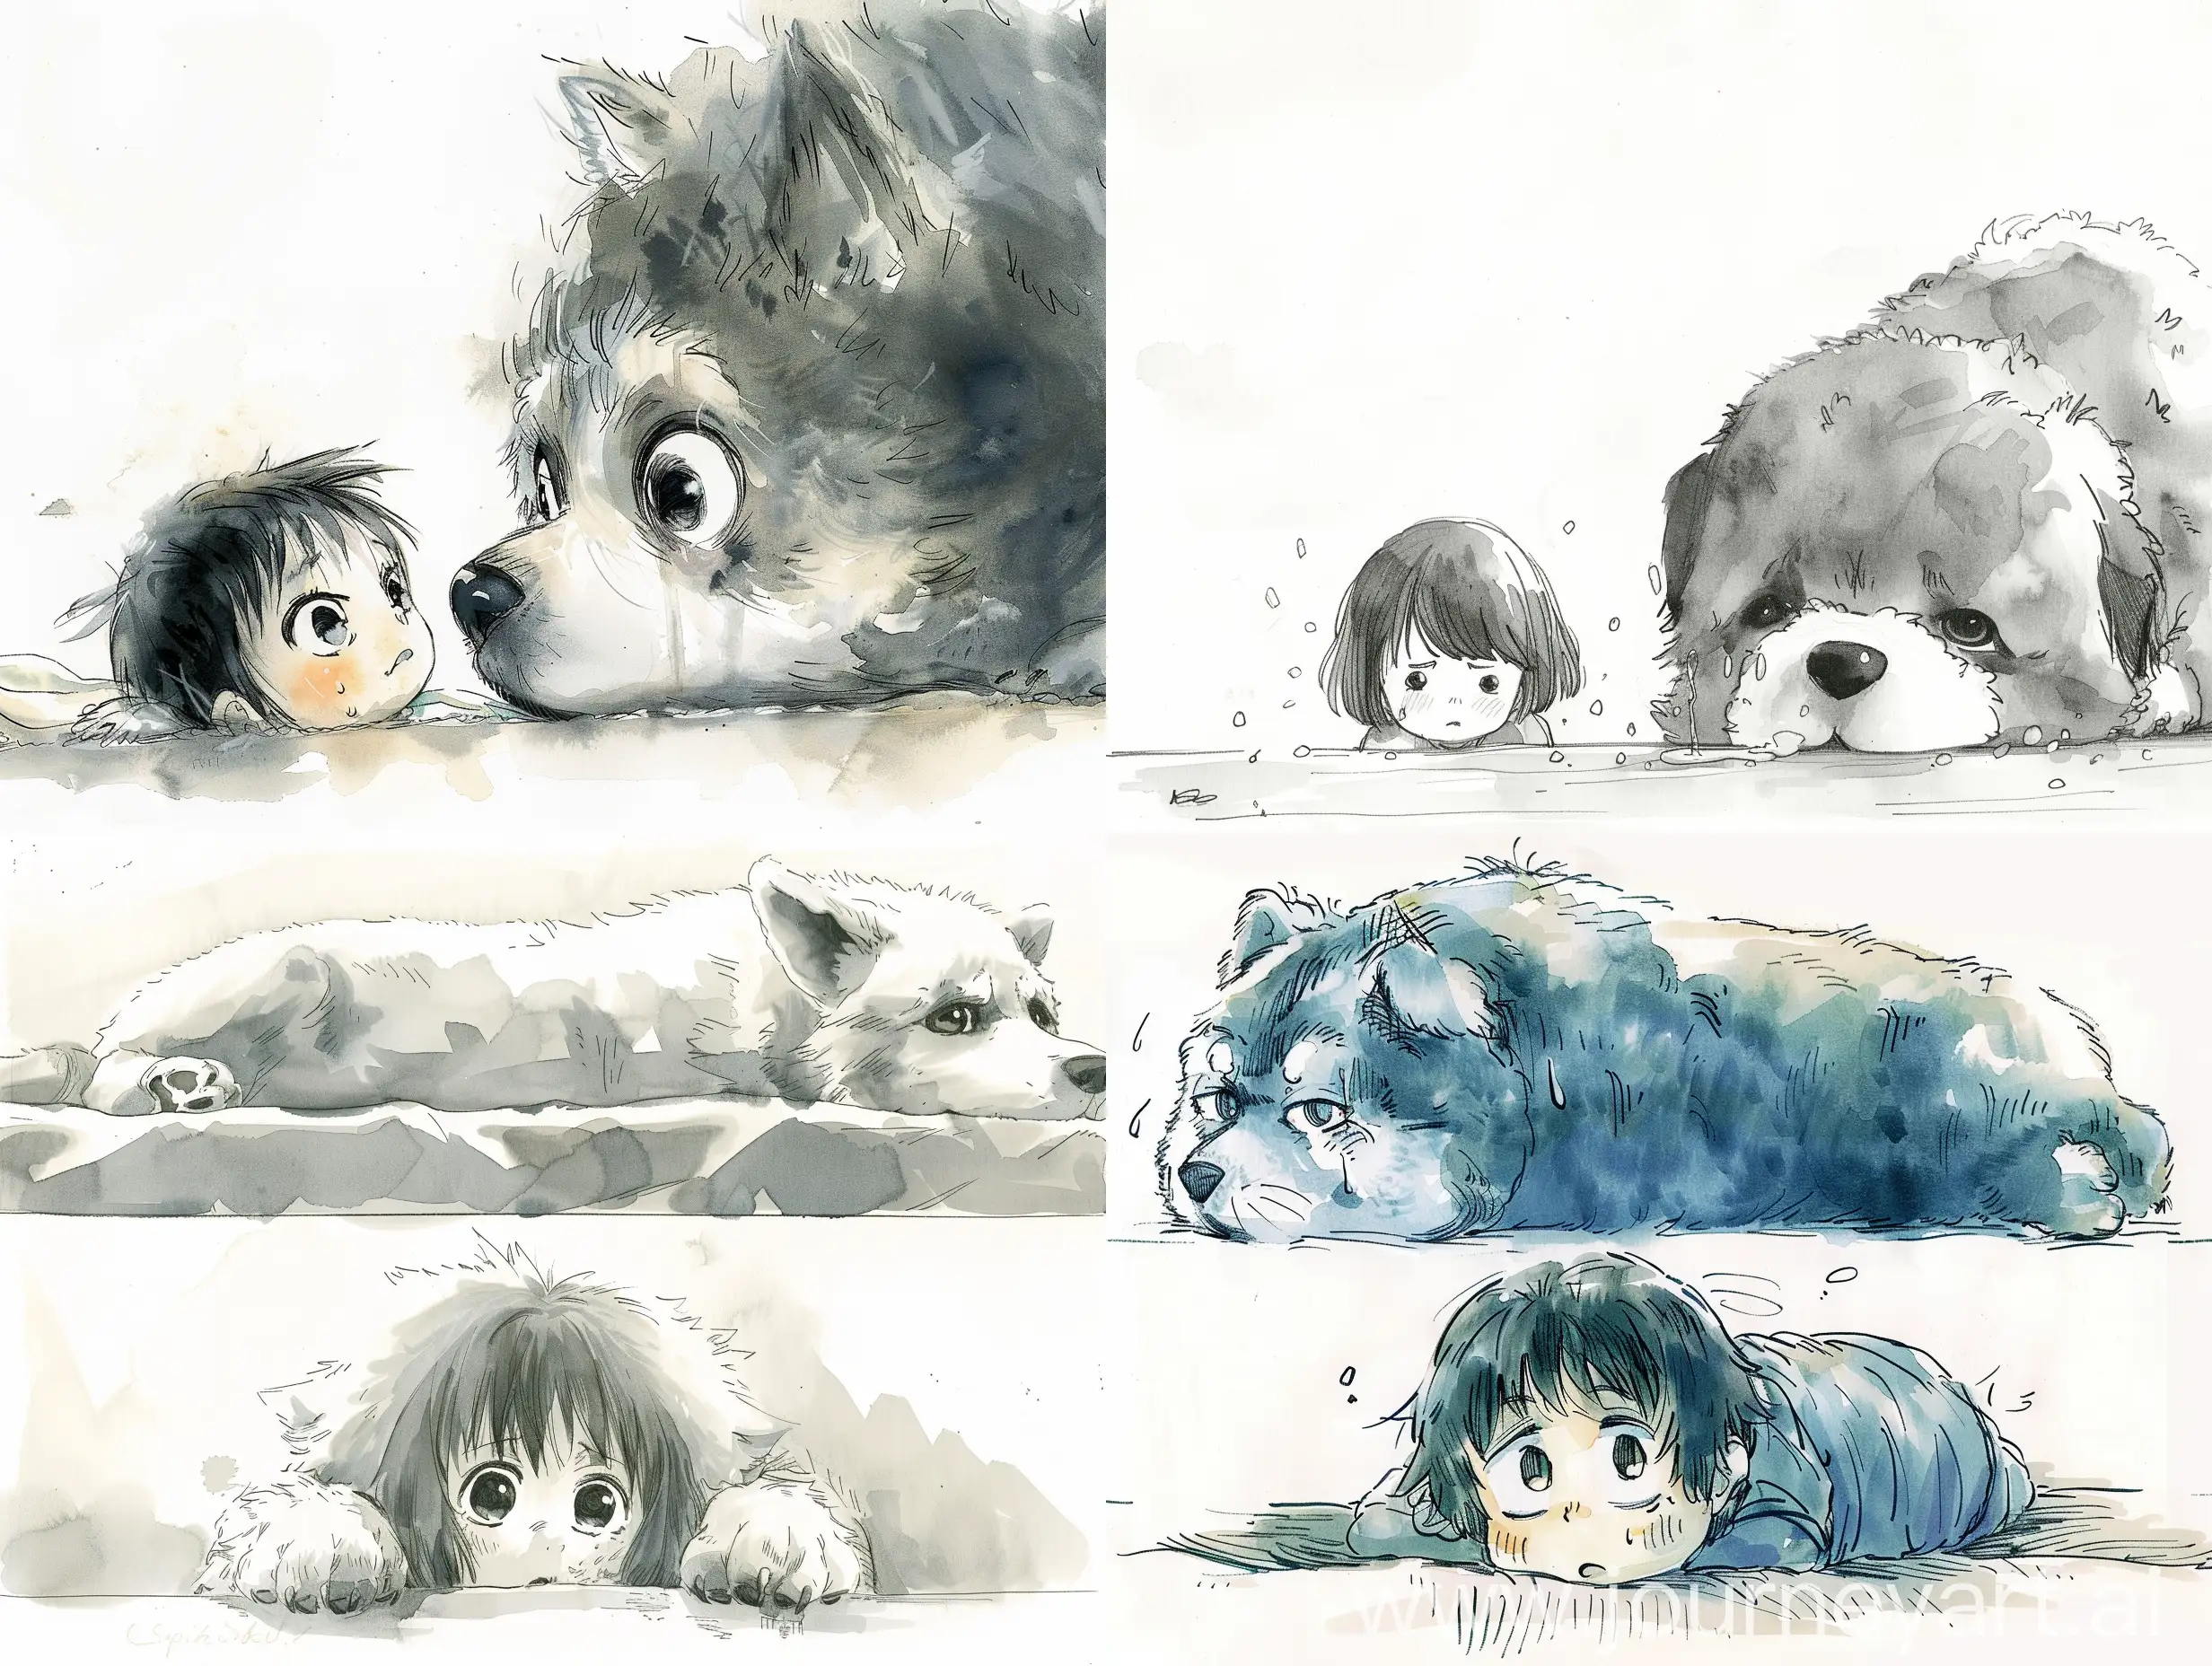 prompt: The image displays manga art style, characterized by clean, expressive lines and shading, This artwork features a chibi style, characterized by exaggerated, cute proportions. It appears to be created with watercolors and ink, giving it a soft, storybook-like quality. It appears to be drawn by a skilled manga artist. The composition is divided into two panels. The top panel features a large, fluffy dog lying down and died of old age. In the bottom panel, a worried-looking child with short, dark hair and big eyes gazes upwards, he seemingly towards the dog and crying (clear tears). The background is plain white, emphasizing the emotions of the characters. The artwork focuses on the emotional connection between the child and the dog, creating a poignant scene.

